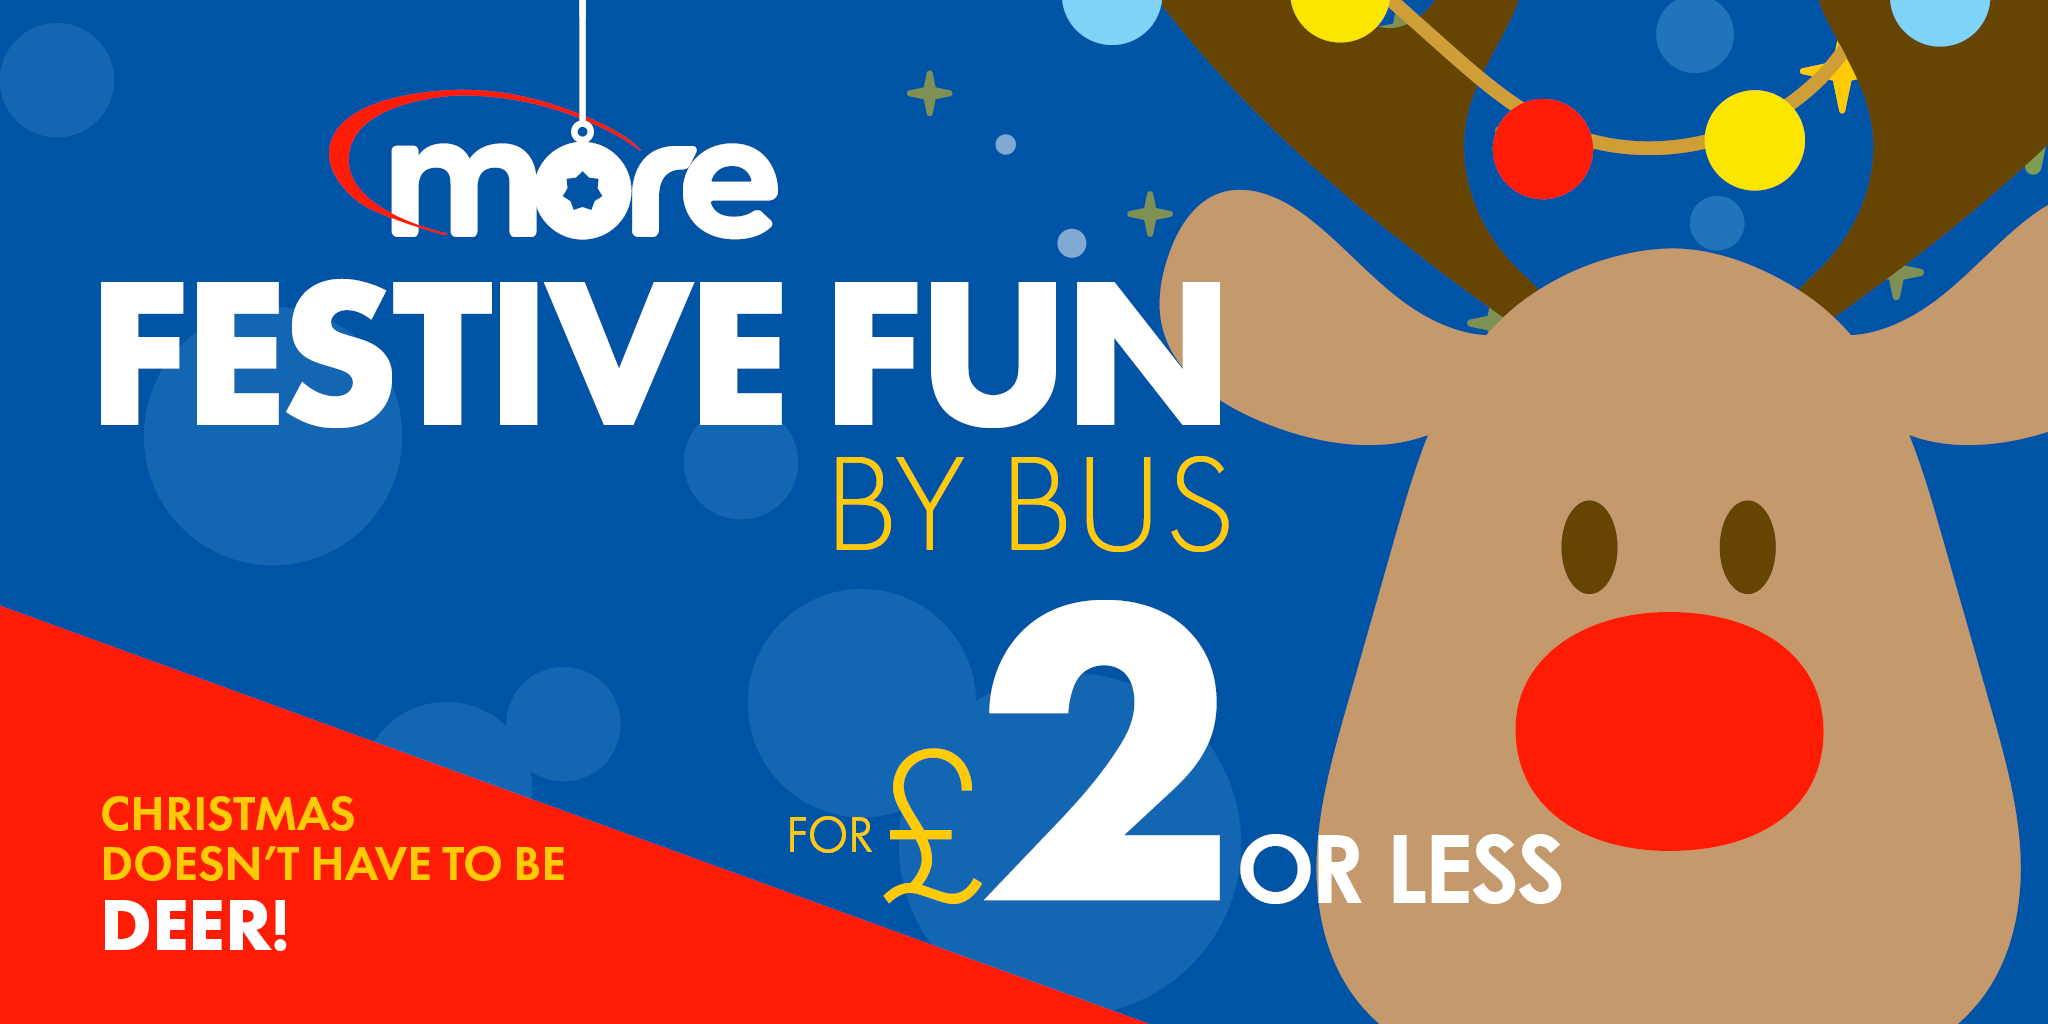 festive fun by bus for £2 or less image of a reindeer